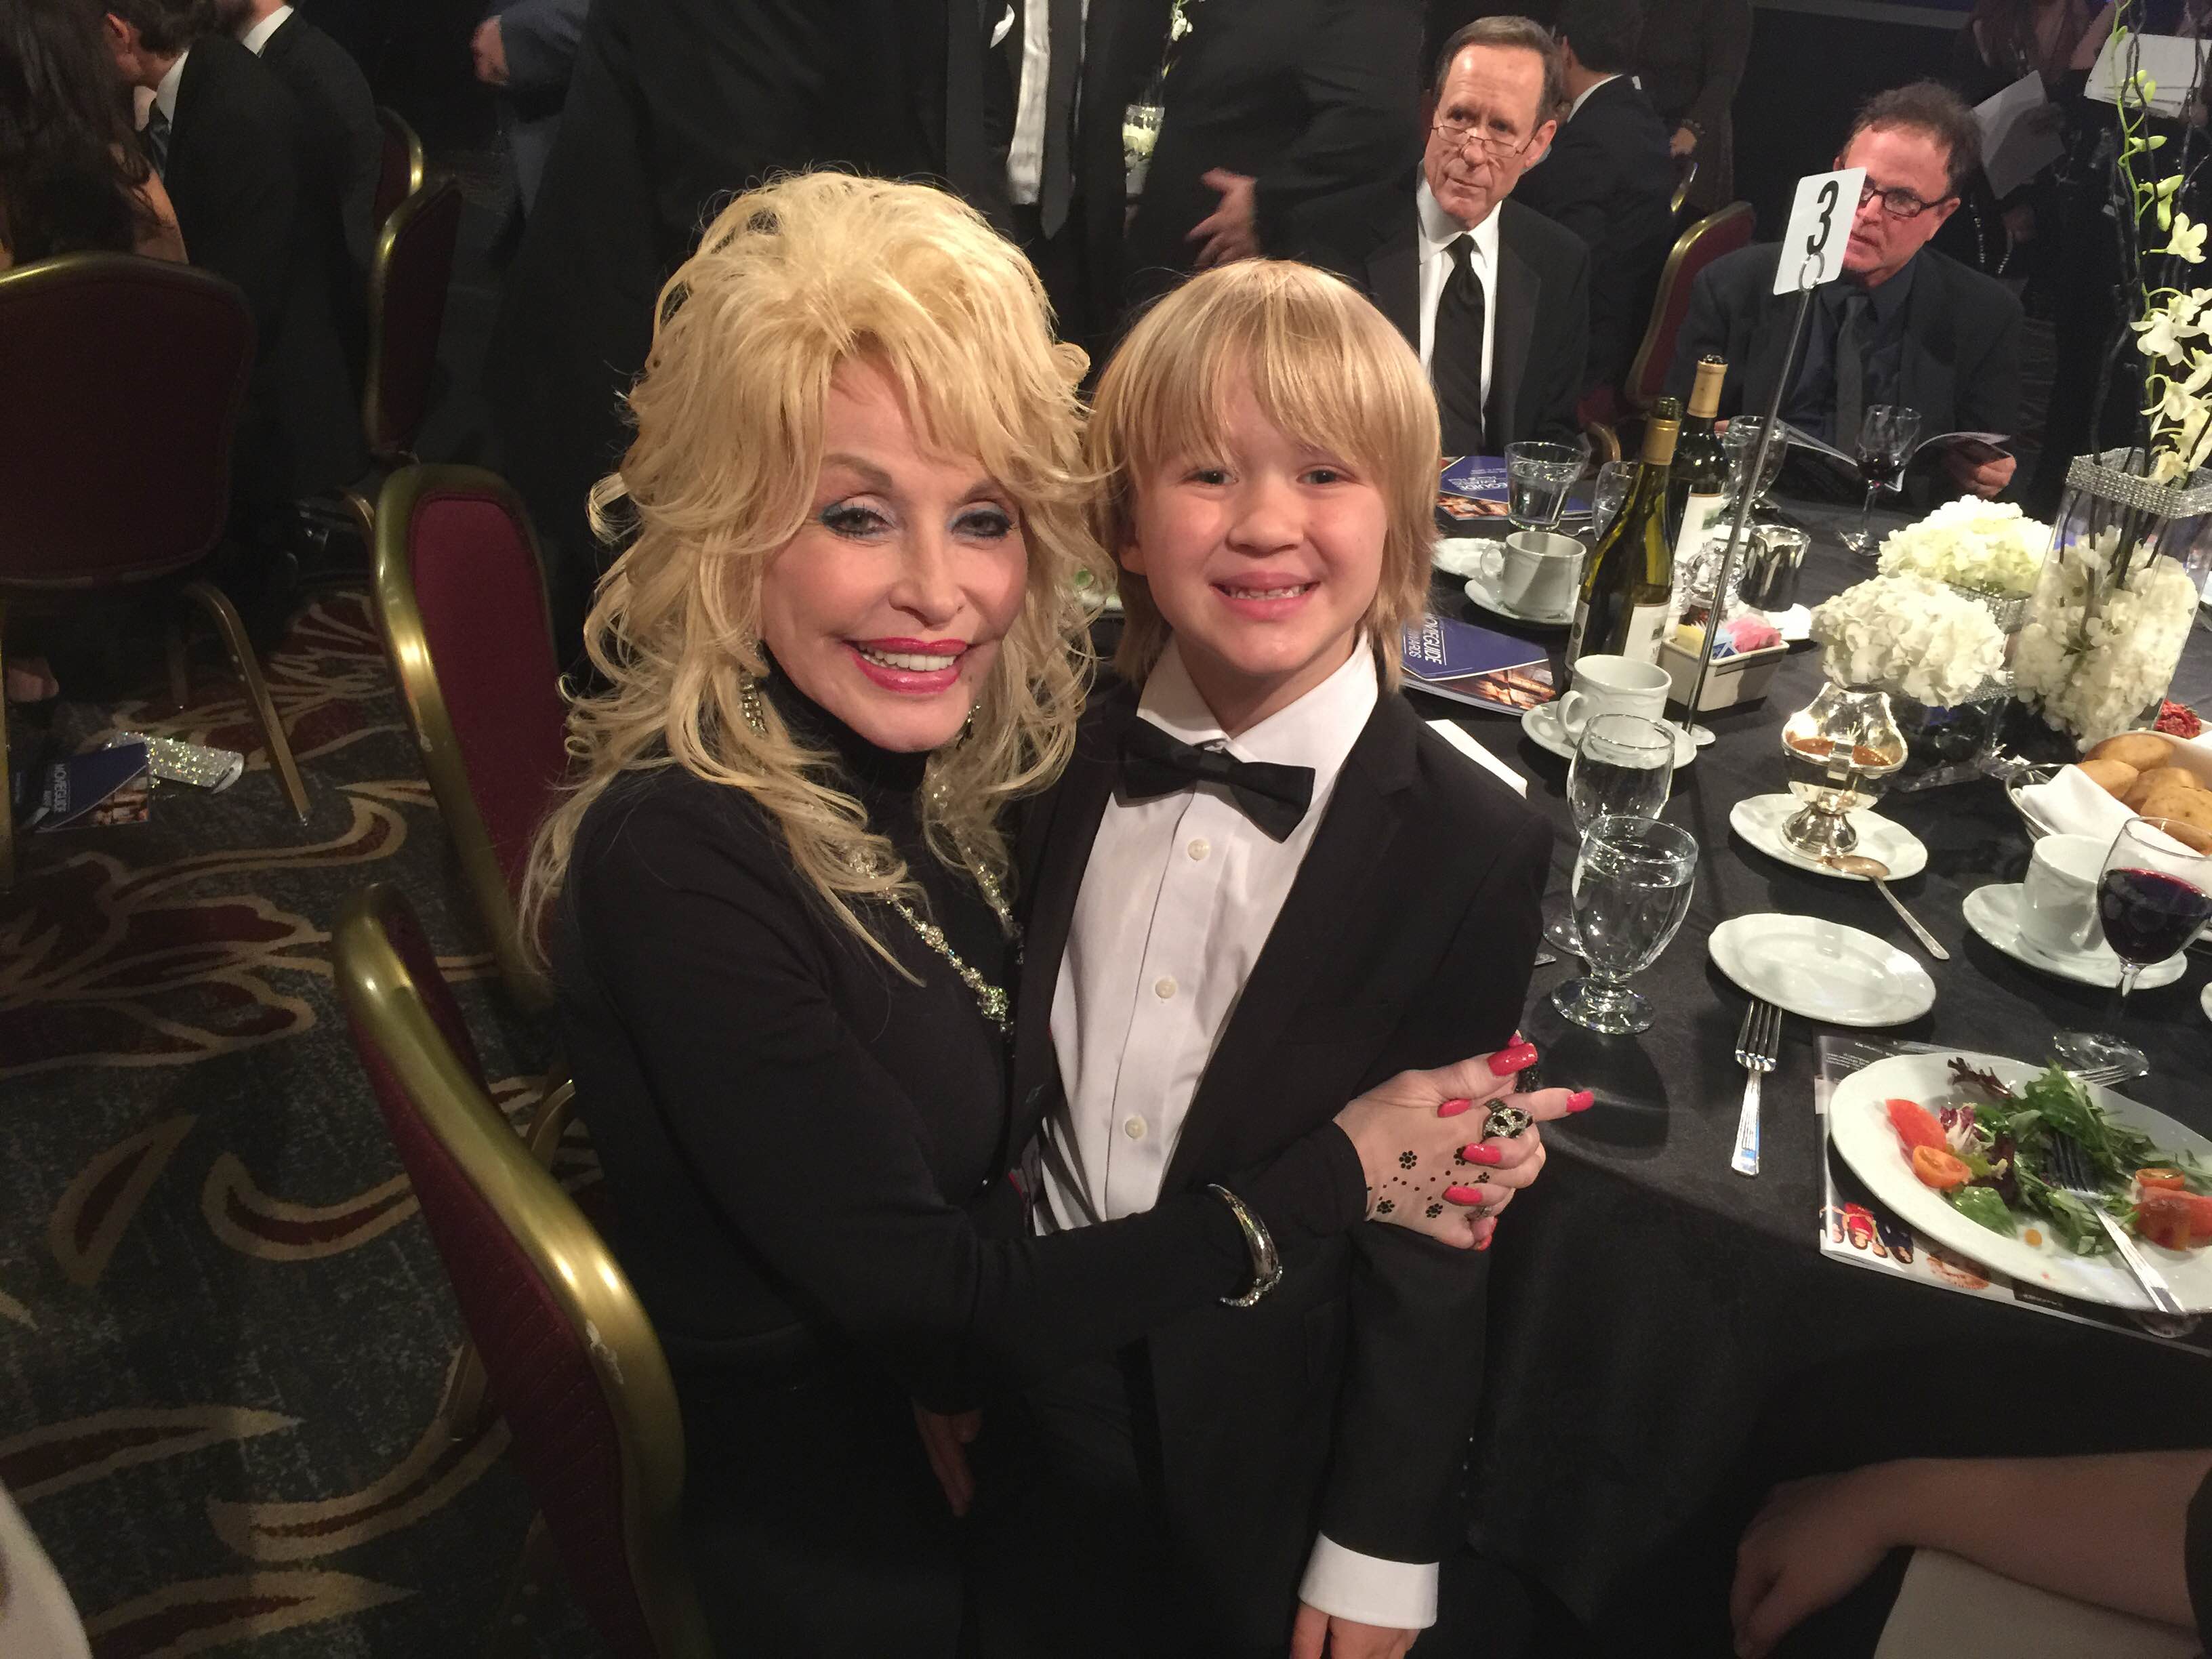 Bobby Batson with Dolly Parton at the 24th Annual MovieGuide Awards.